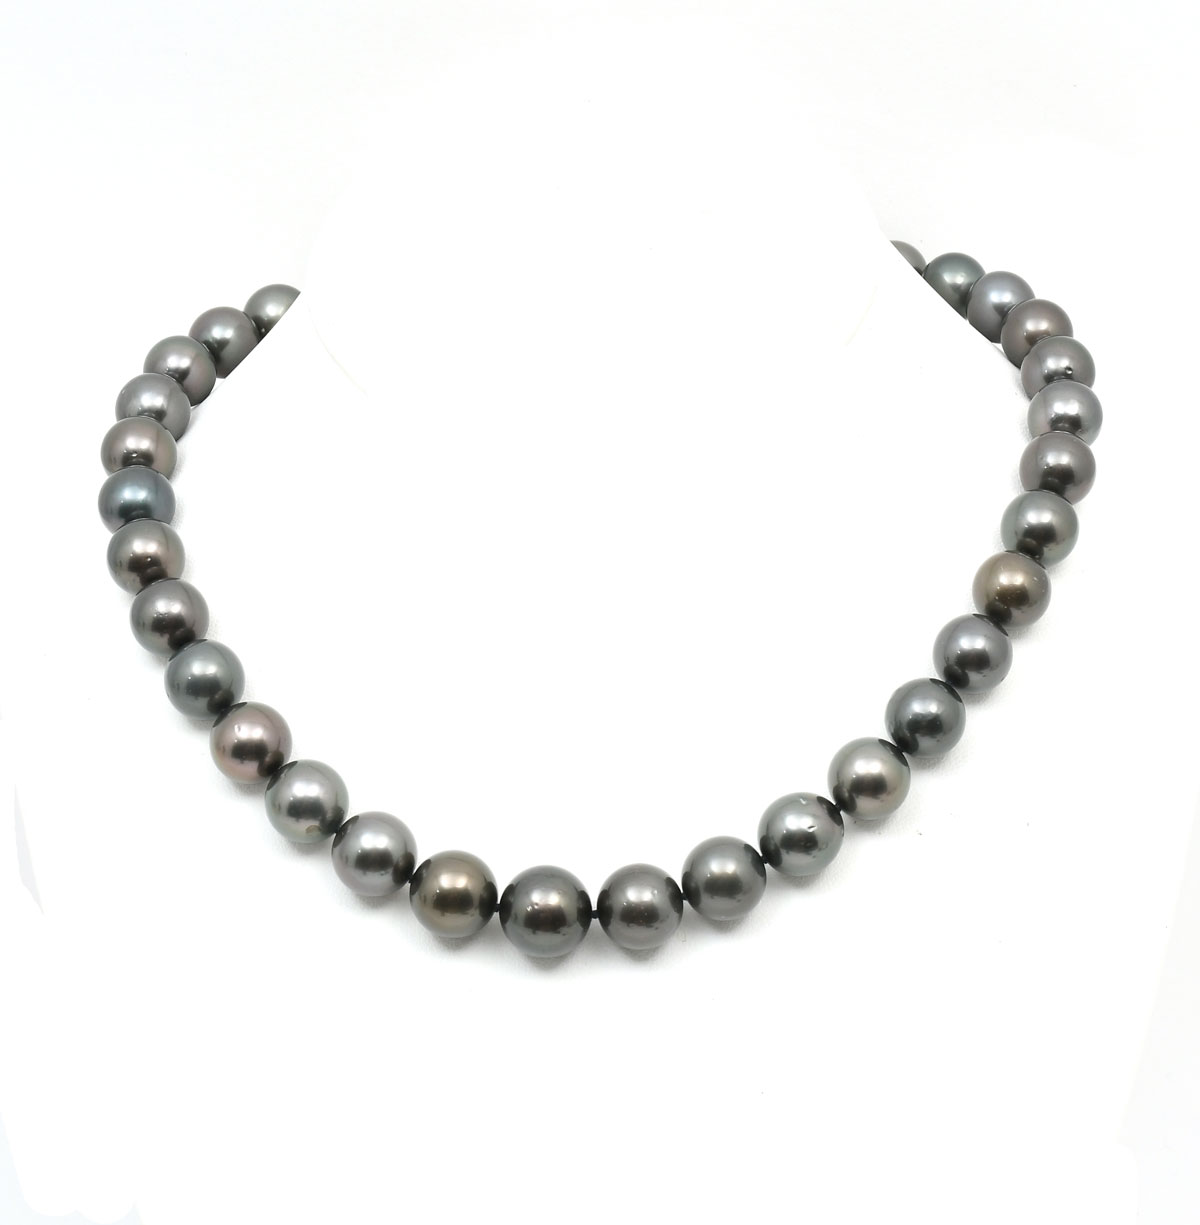 14K SOUTH SEA PEARL NECKLACE: Graduated